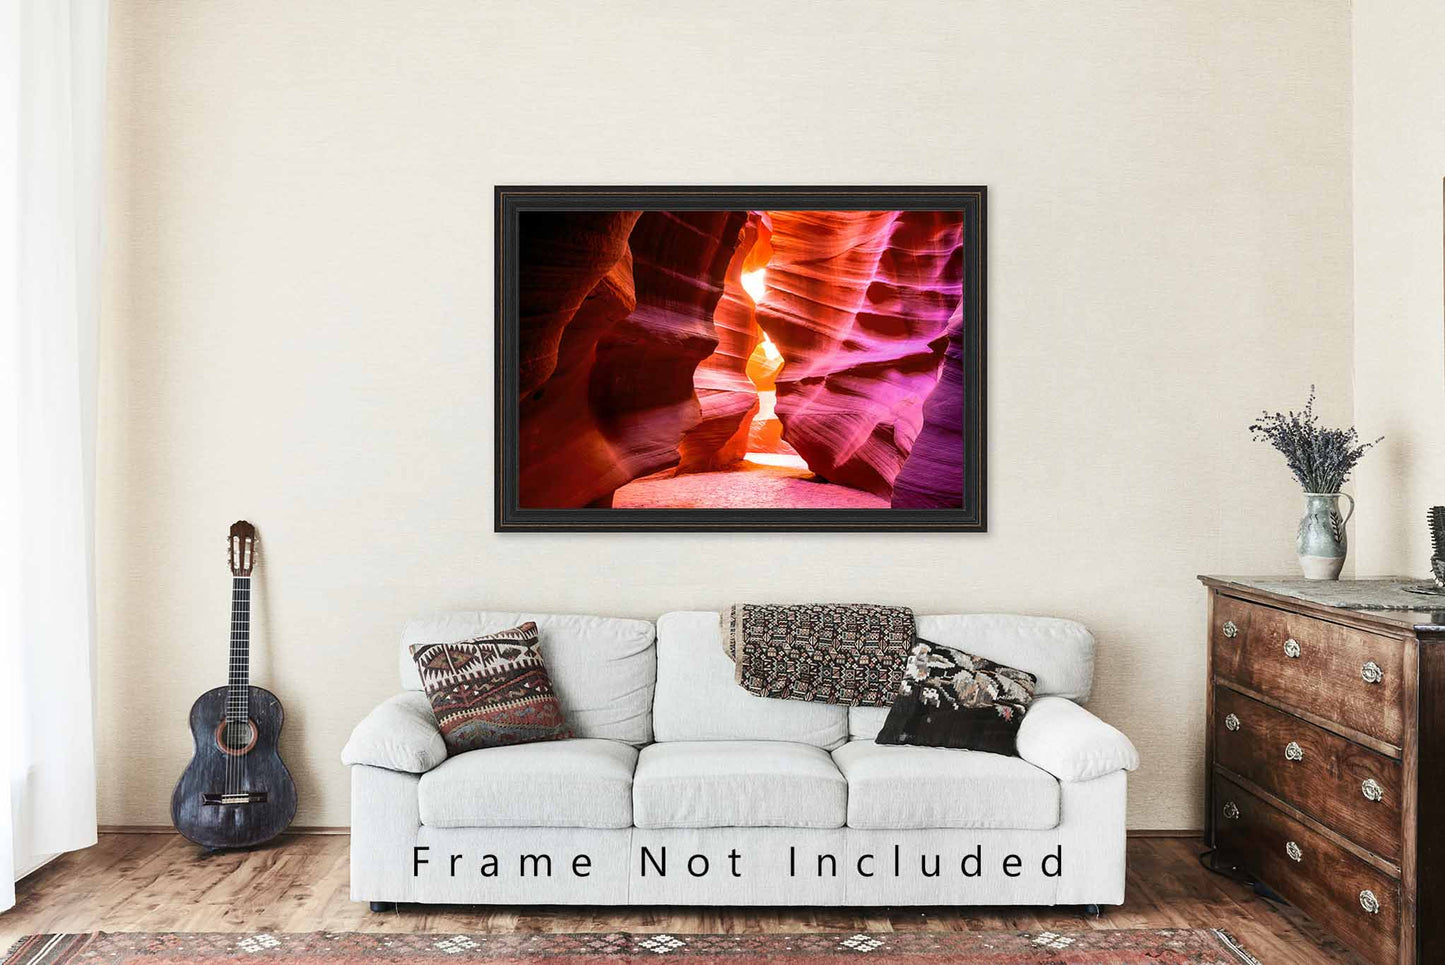 Southwest Photography Print - Picture of Antelope Canyon Walls Shaped as Hourglass in Arizona - Southwestern Desert Photo Wall Art Decor